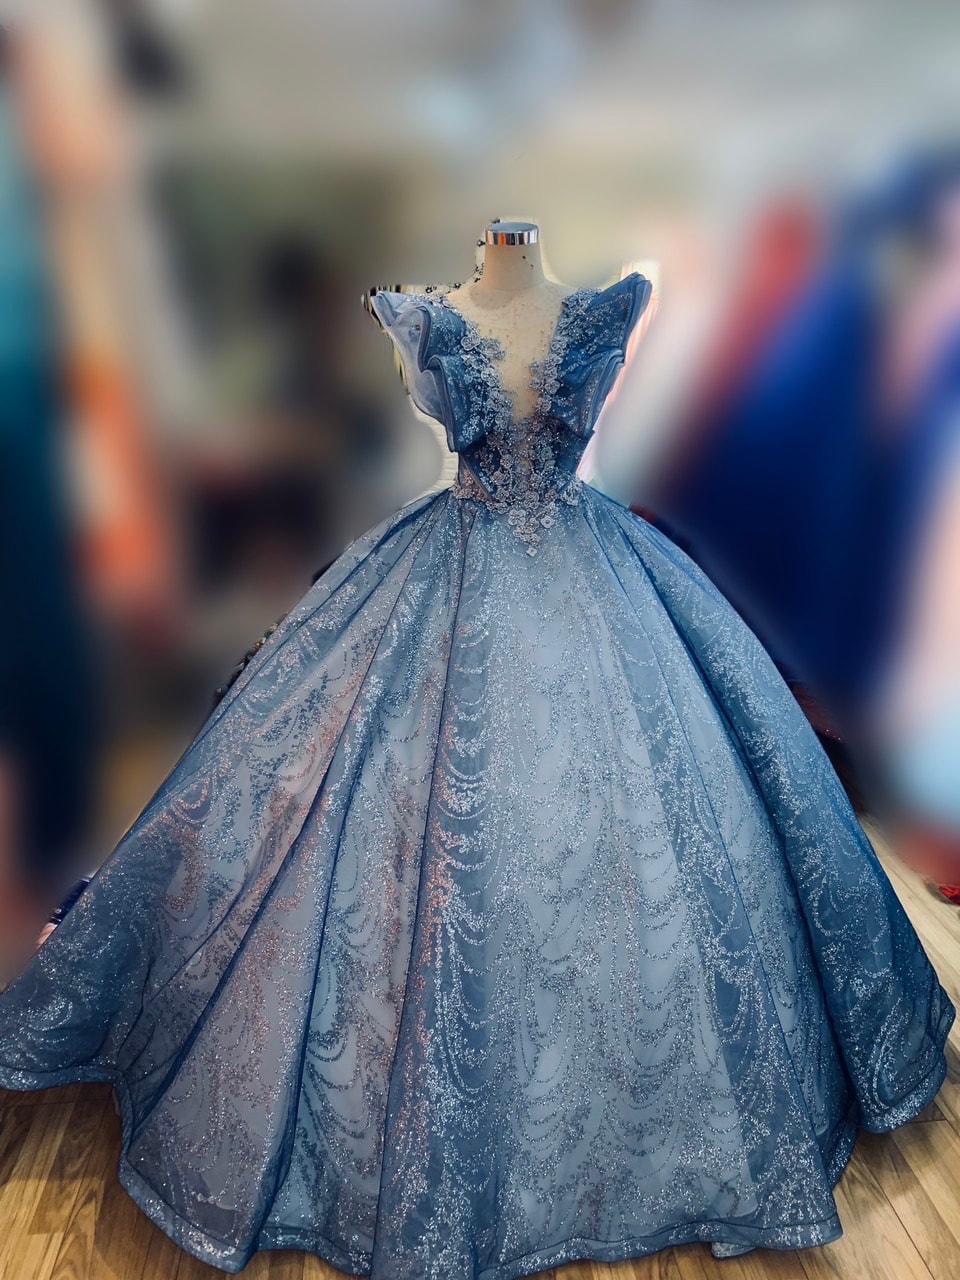 Luxury Ocean Blue Lace Ball Gown With Rhinestone Embellishments And Crystal  Applique Off Shoulder Pageant Evening Gowns For Engagement Or Special  Occasions From Xzy1984316, $542.72 | DHgate.Com